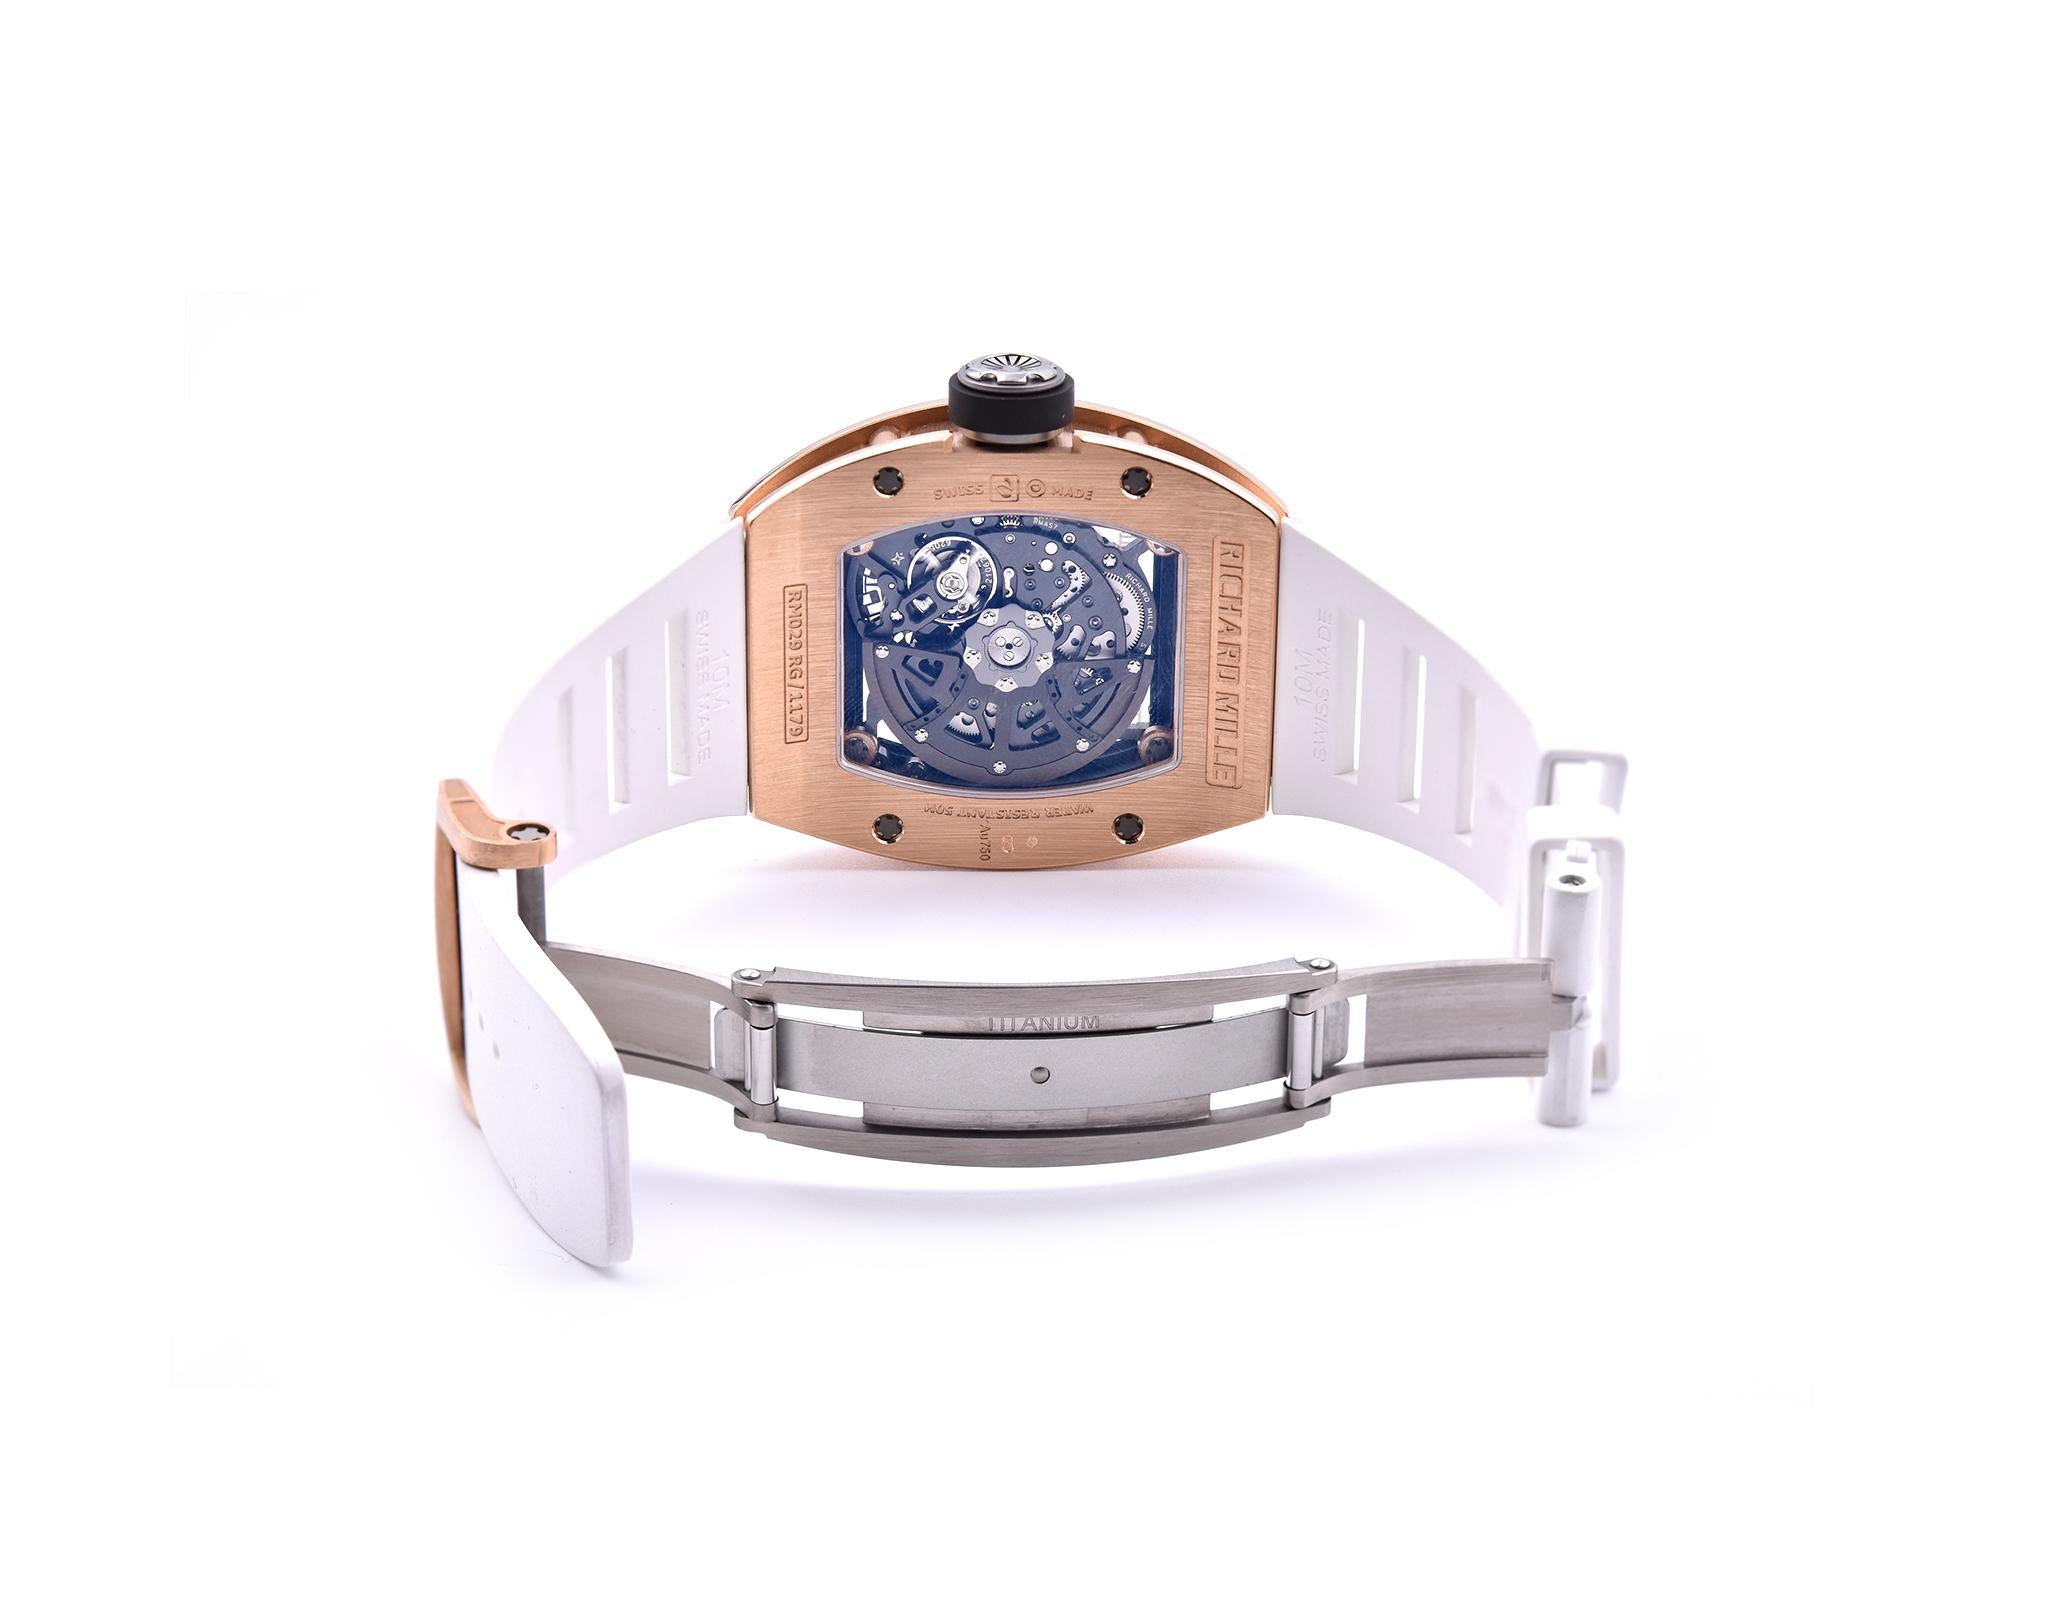 Richard Mille Rose Gold Automatic Oversize Date Watch Ref. RM029 In Excellent Condition In Scottsdale, AZ